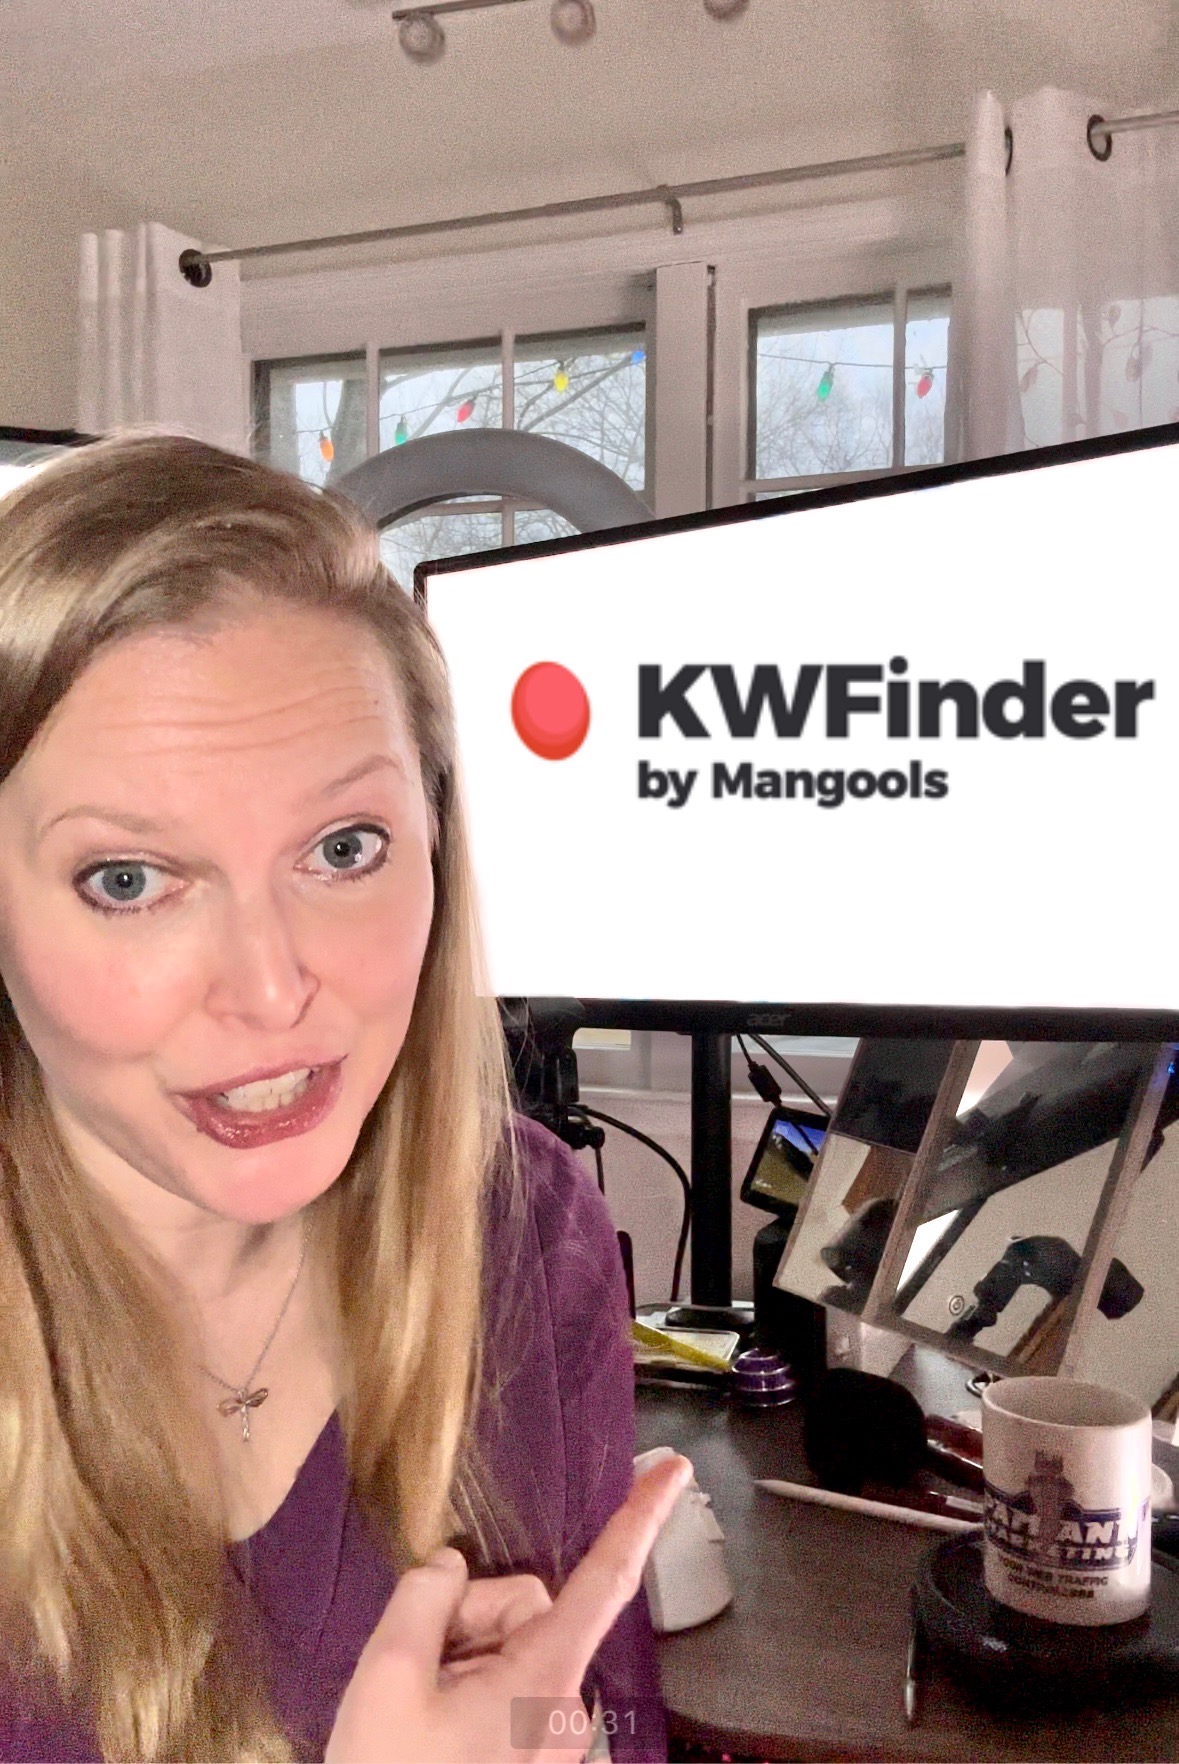 Picture of Pam pointing at computer screen with the KWFinder logo on it